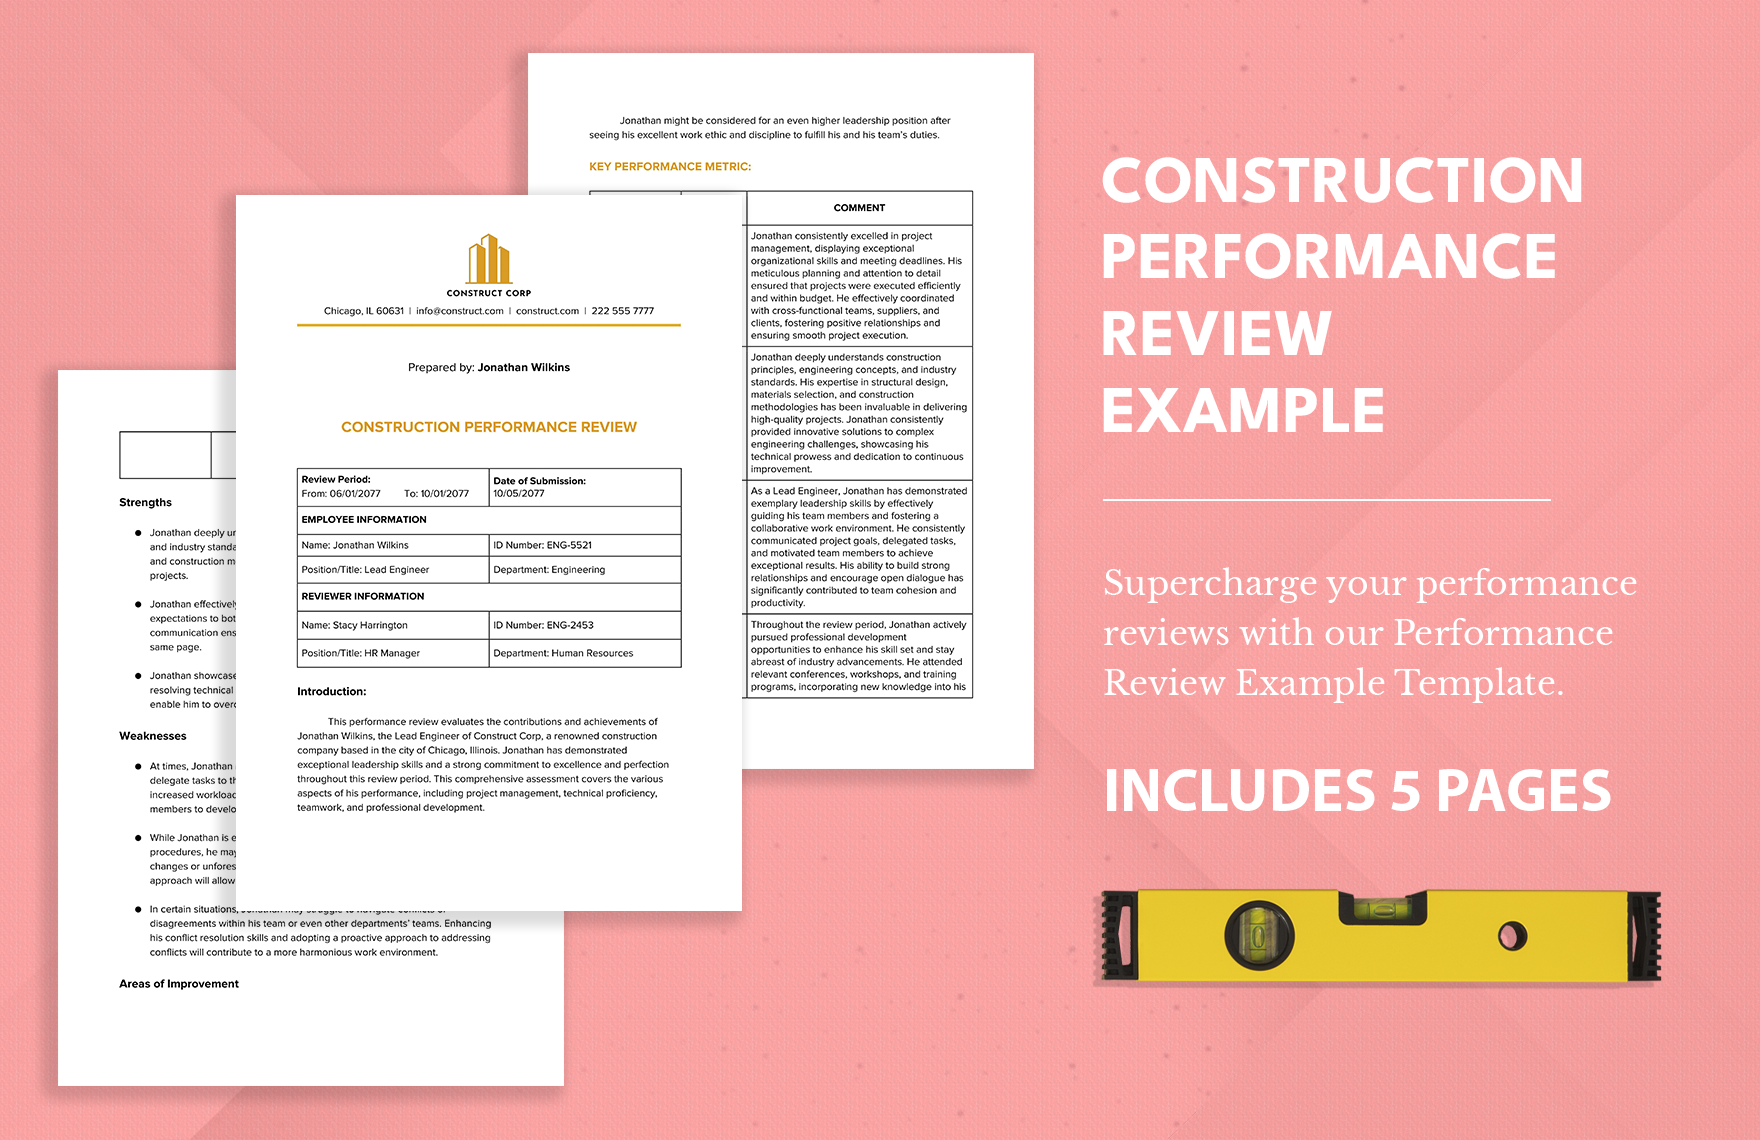 Construction Performance Review Example